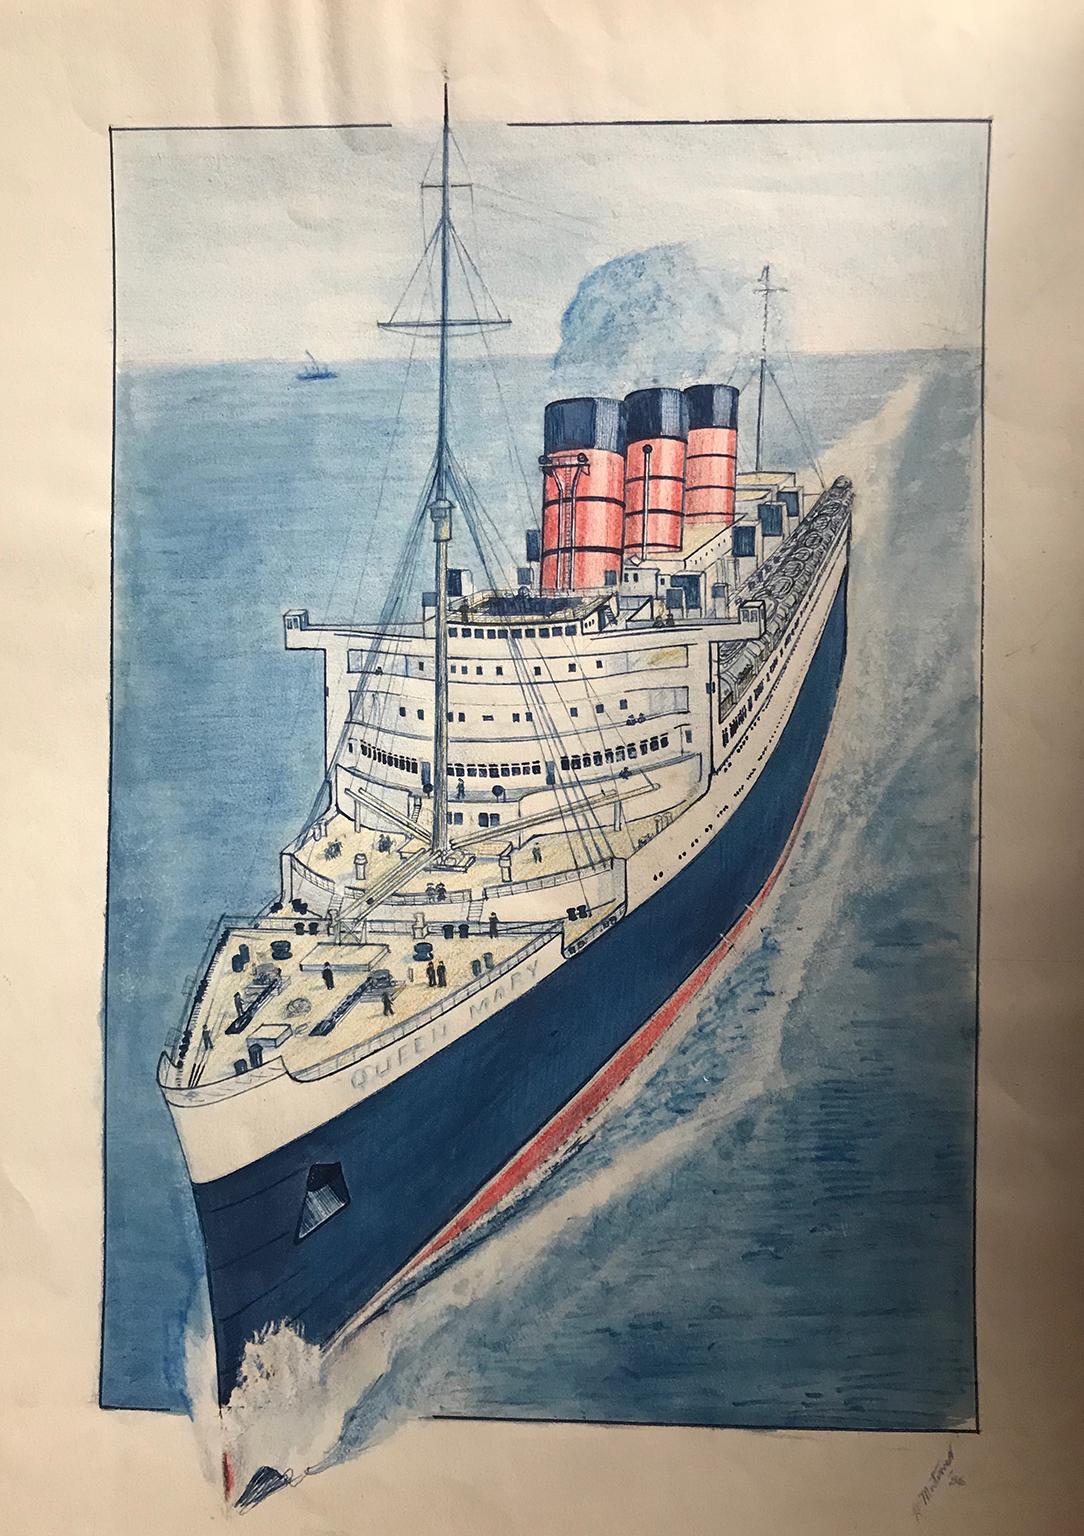 Dimensions: 14.6 x 10.6 in (37 x 27 cm)
Signed and dated l.r.: R. Mortimer/56
Sold in cream museum board, unframed.

Geoffrey Richard Mortimer was an East Anglian painter and illustrator with a particular interest in modes of transportation. This